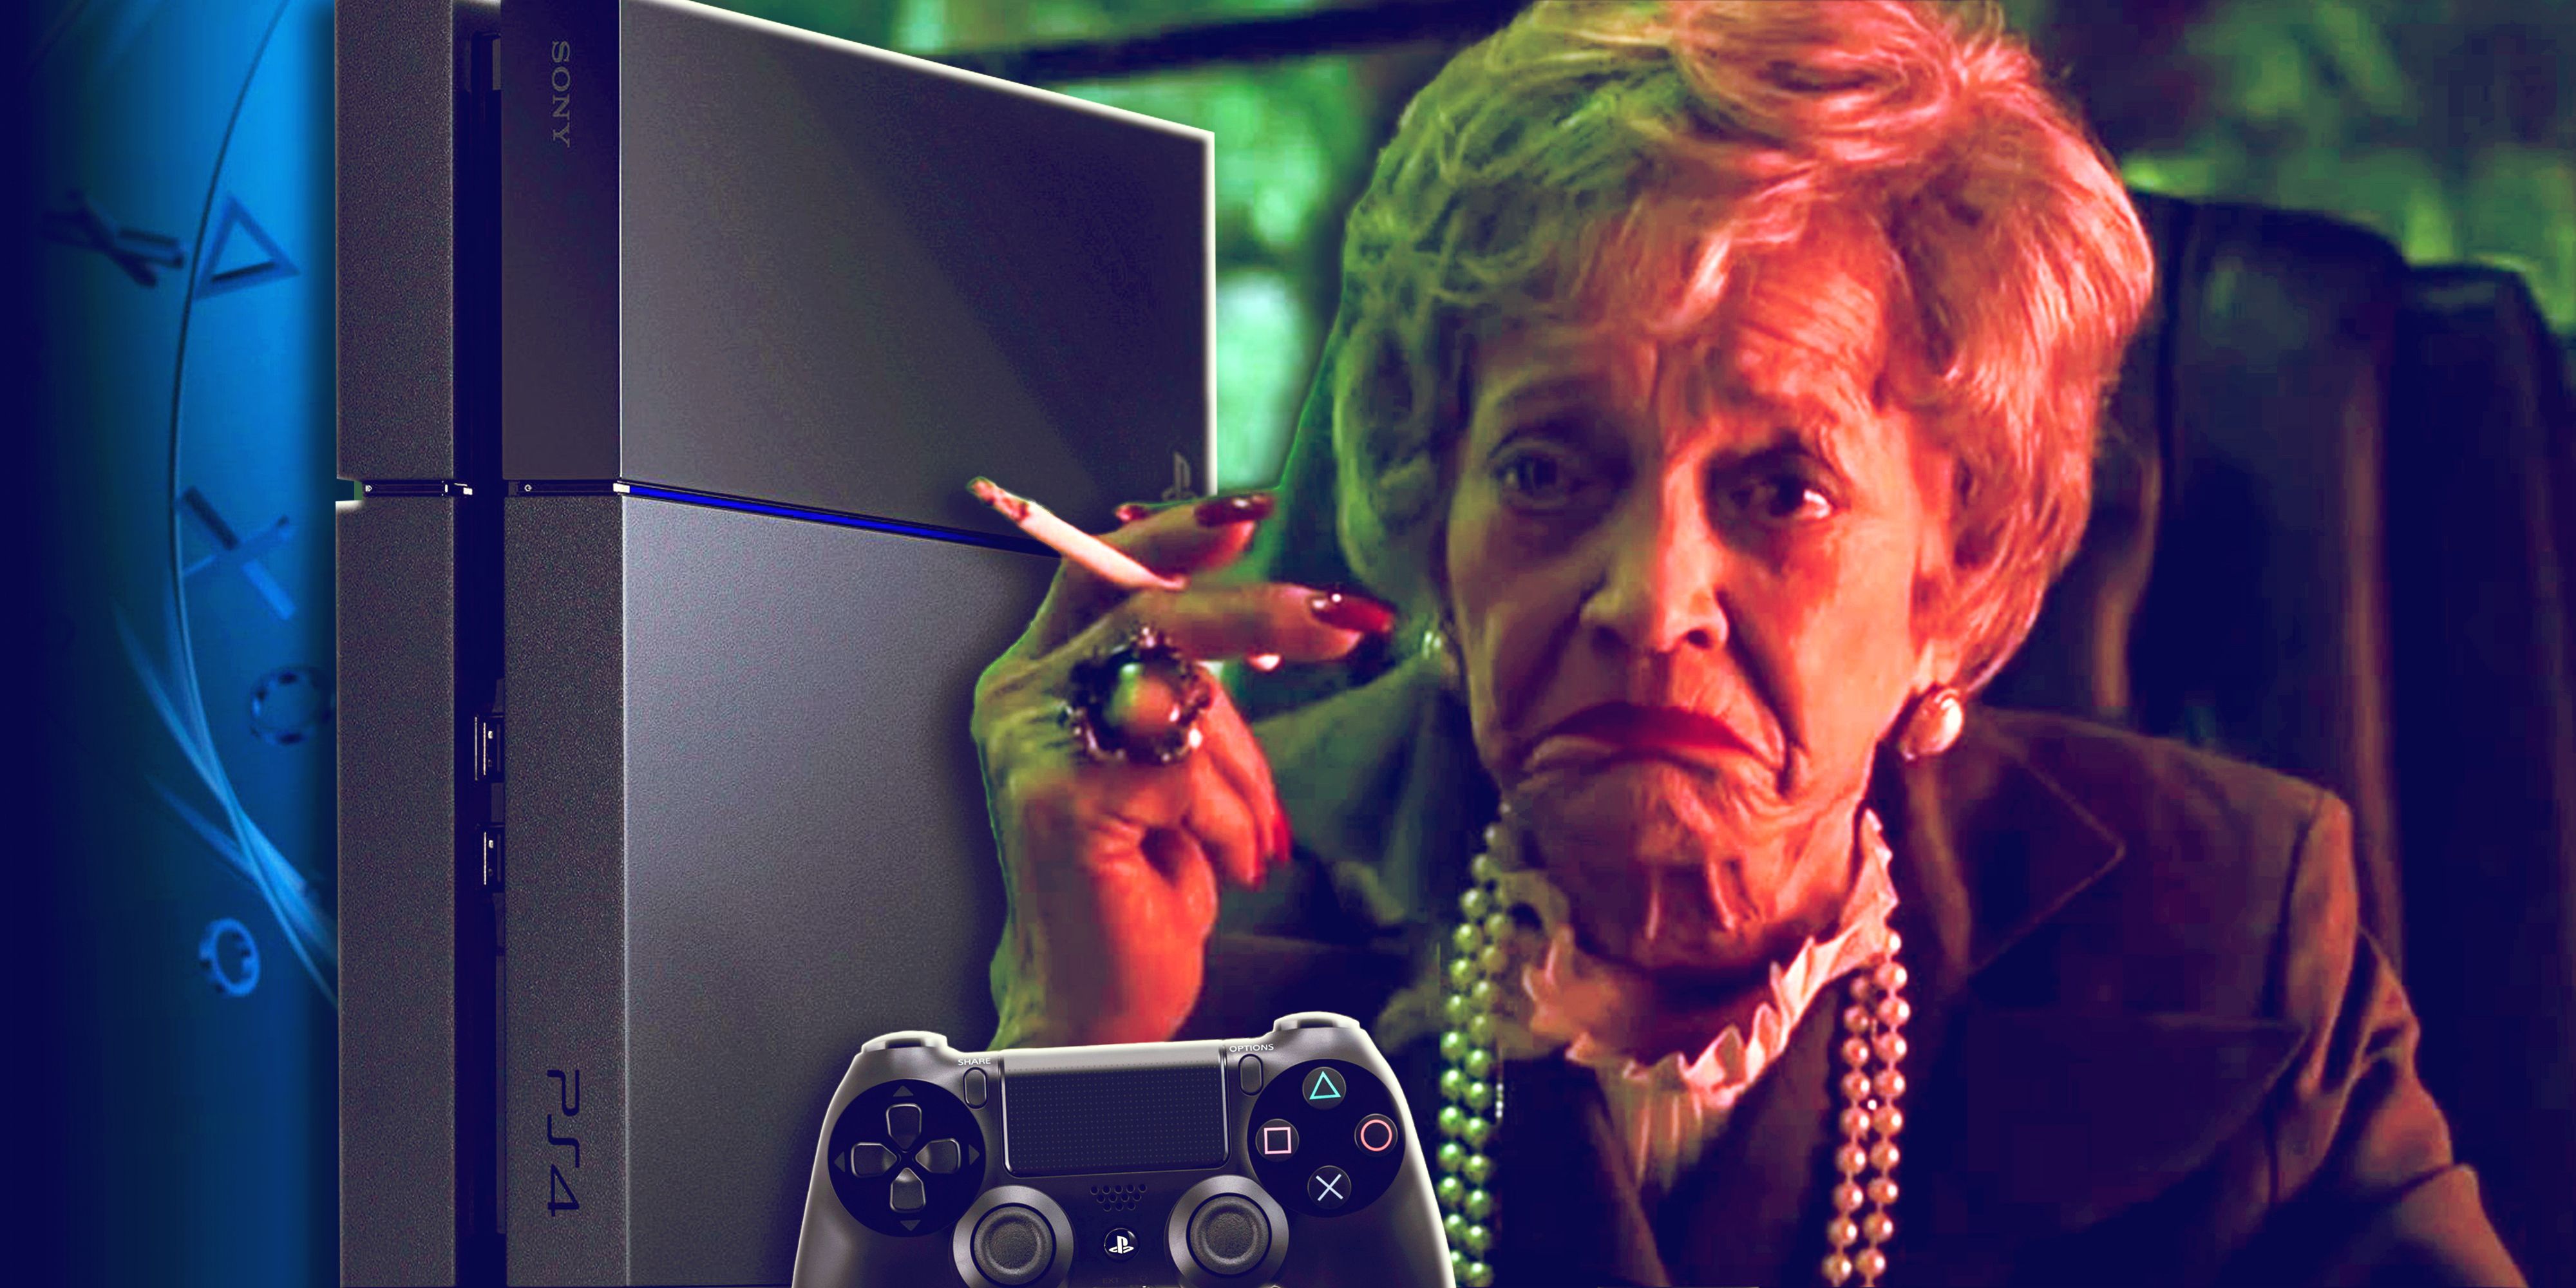 Woman smoking a cigarette with a PS4 and DualShock 4 in the picture